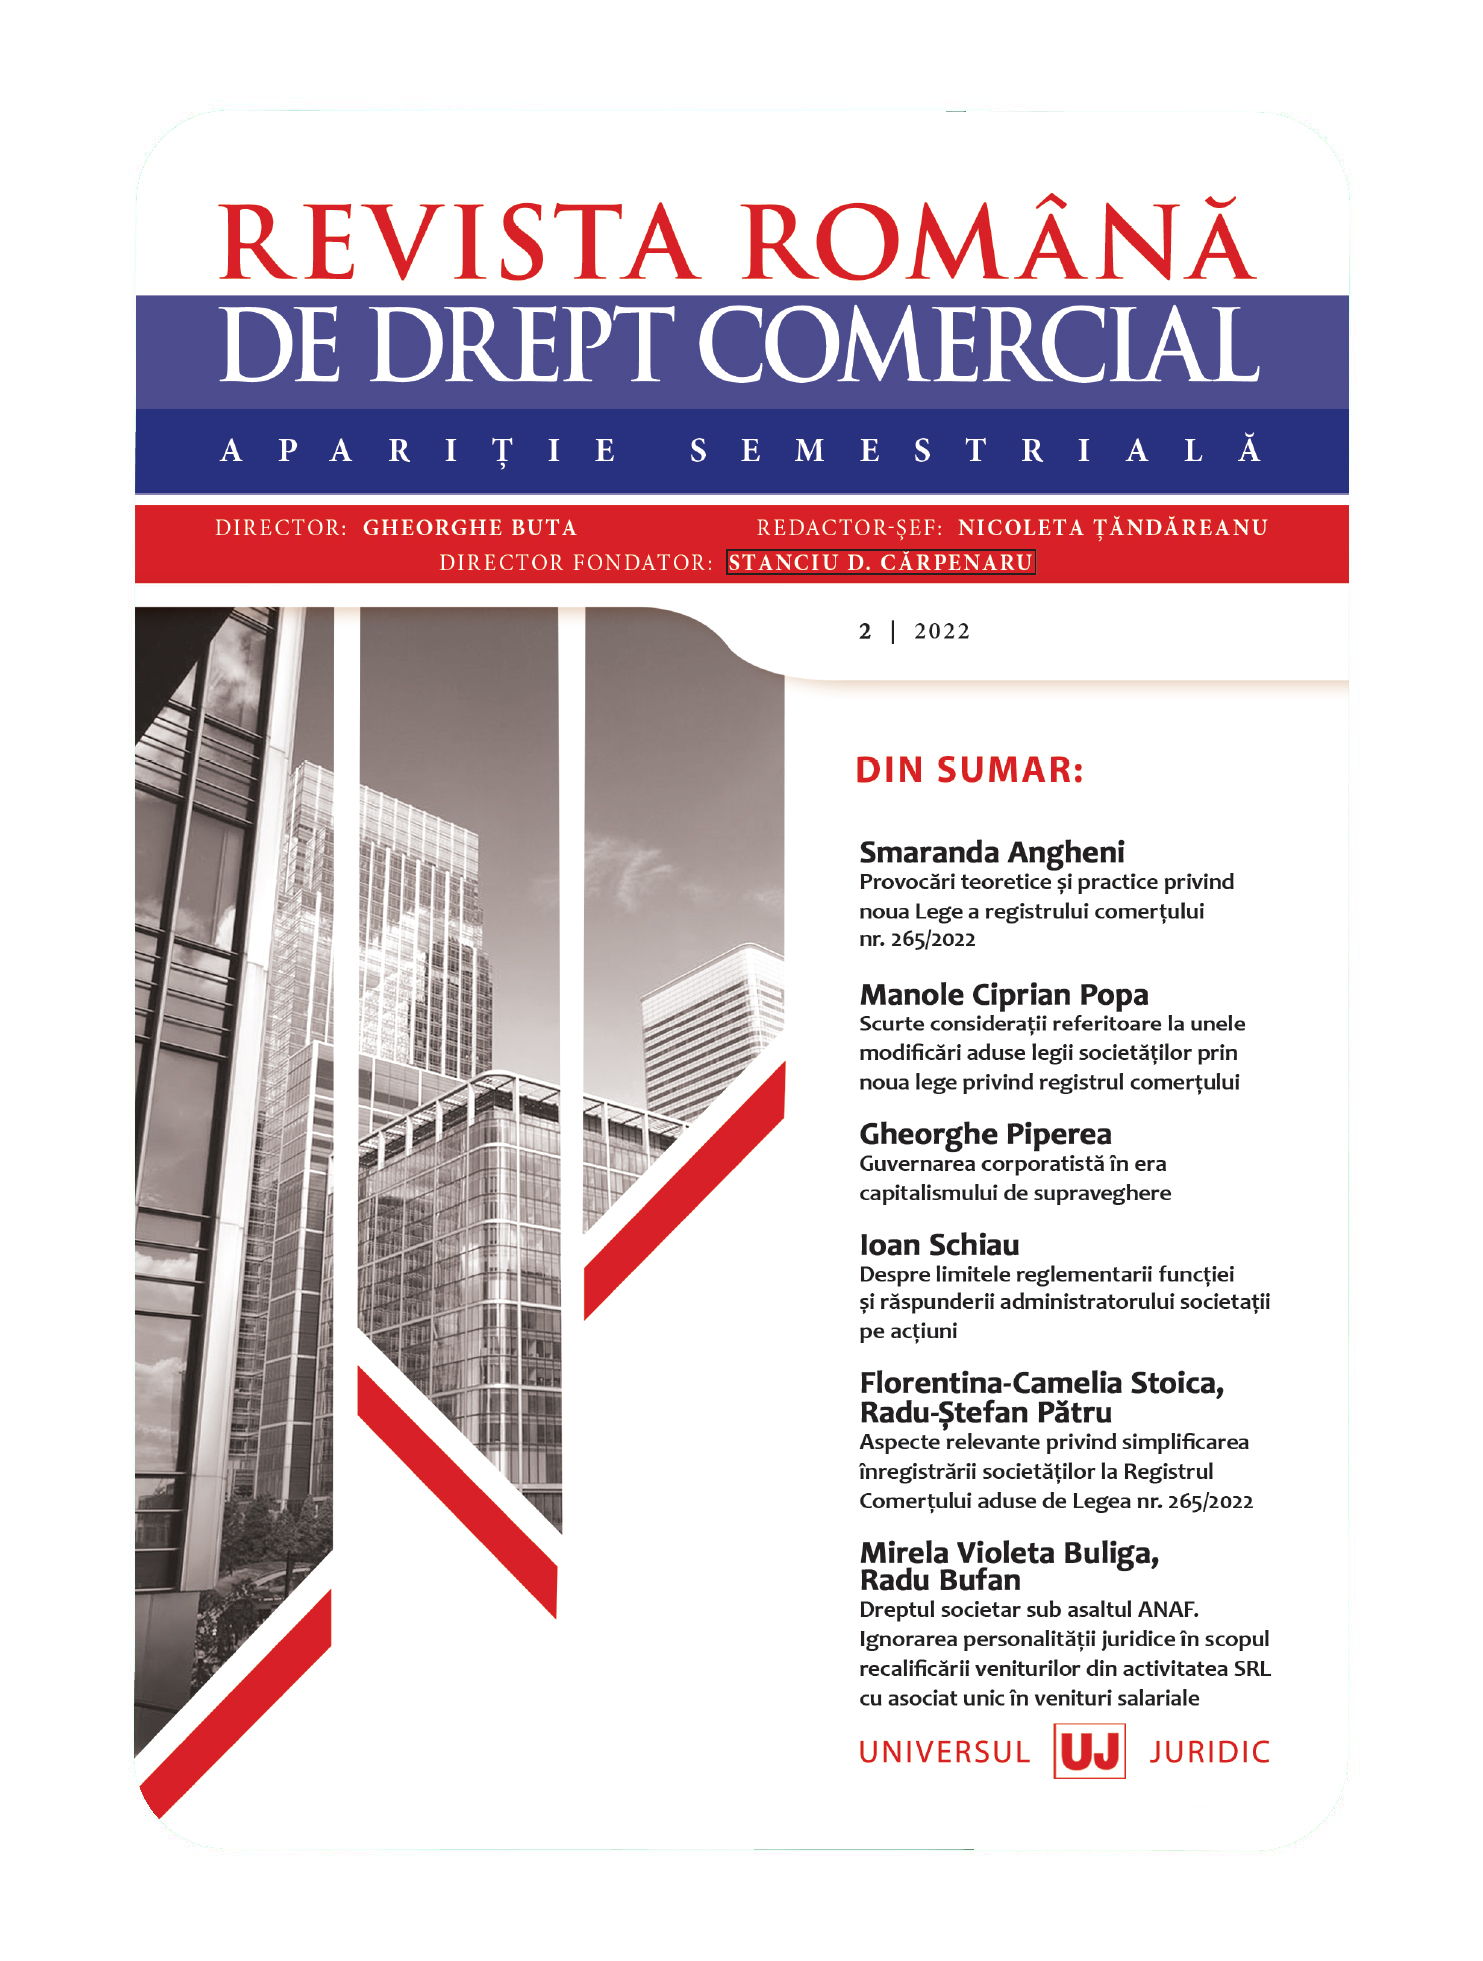 Unilateral termination or adaptation of commercial contracts in the context of major crises Cover Image